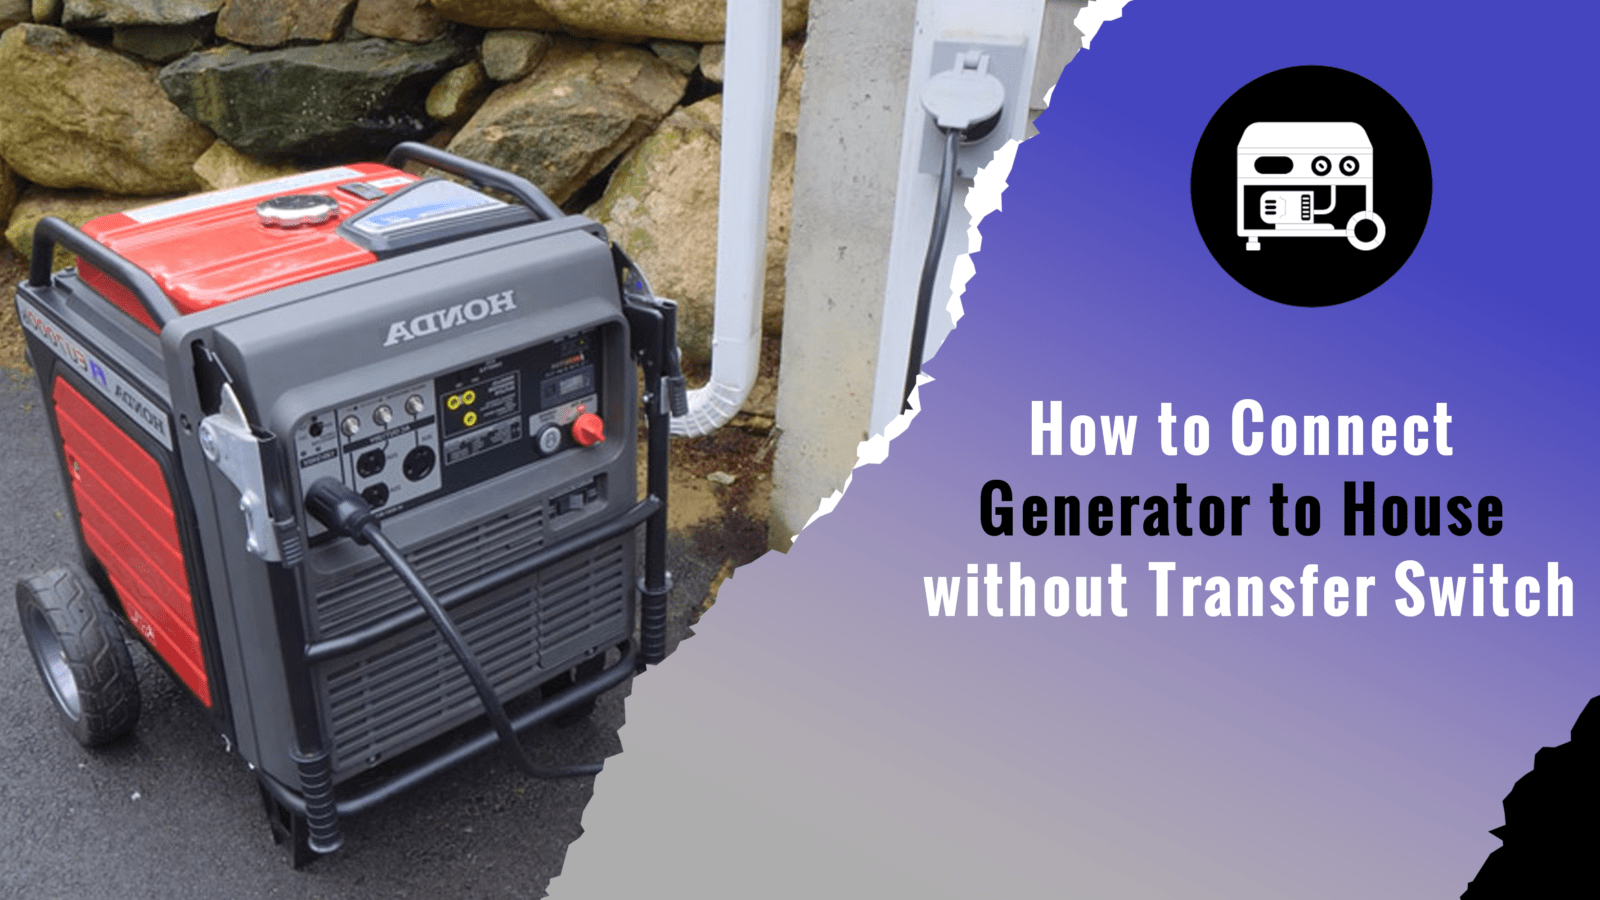 How to Connect Generator to House without Transfer Switch